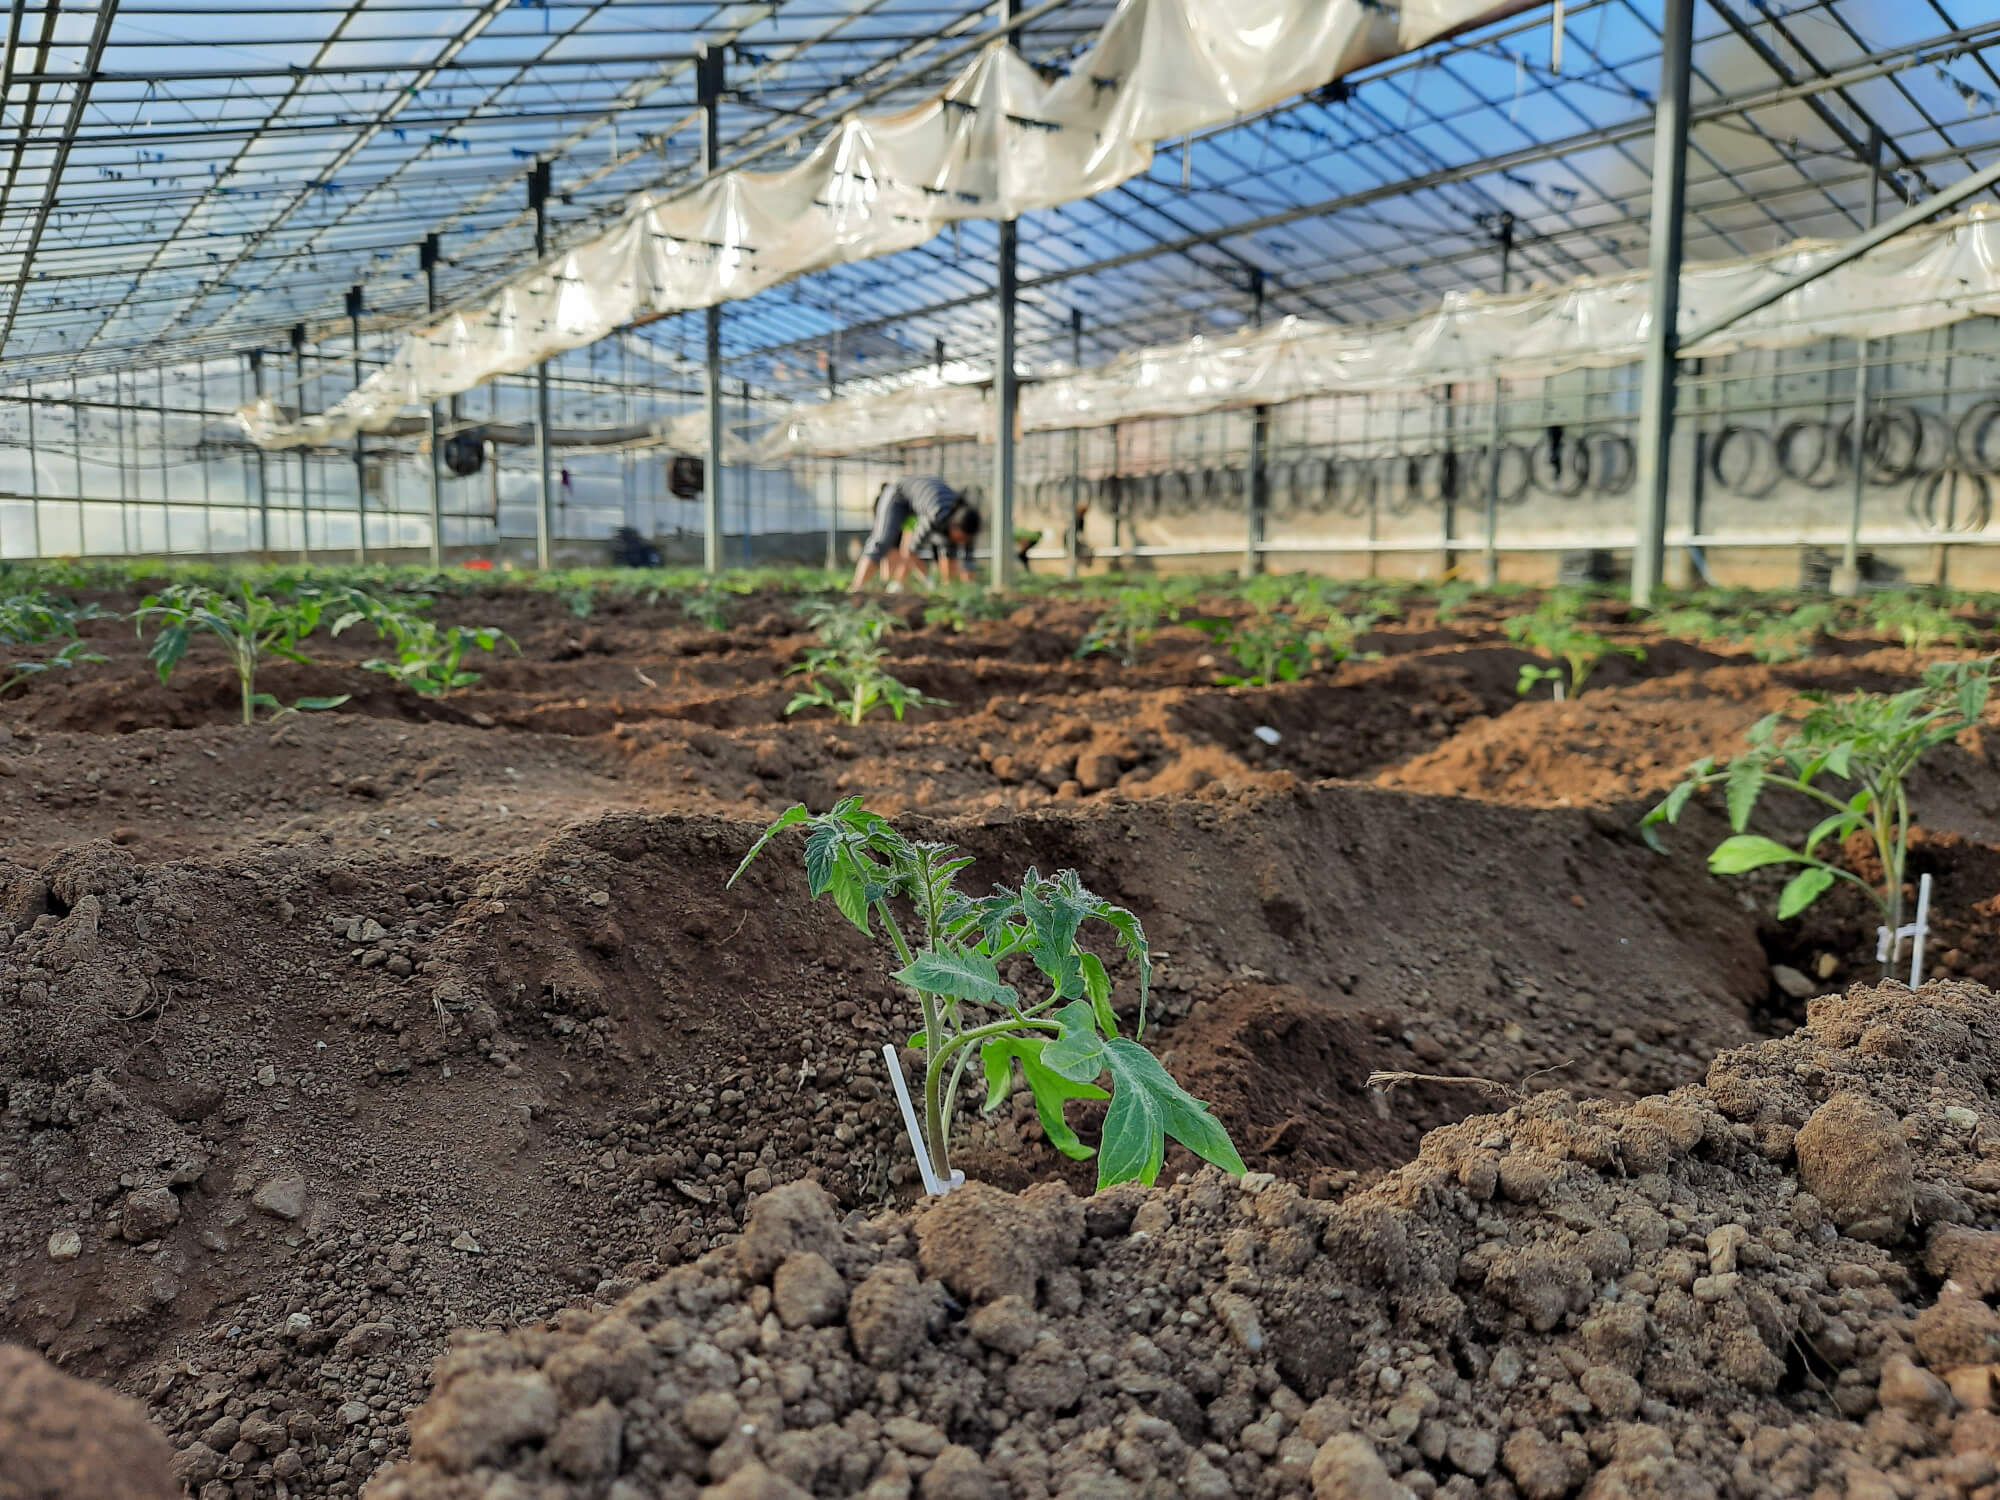 The transplanting of Ox-heart tomatoes in greenhouse